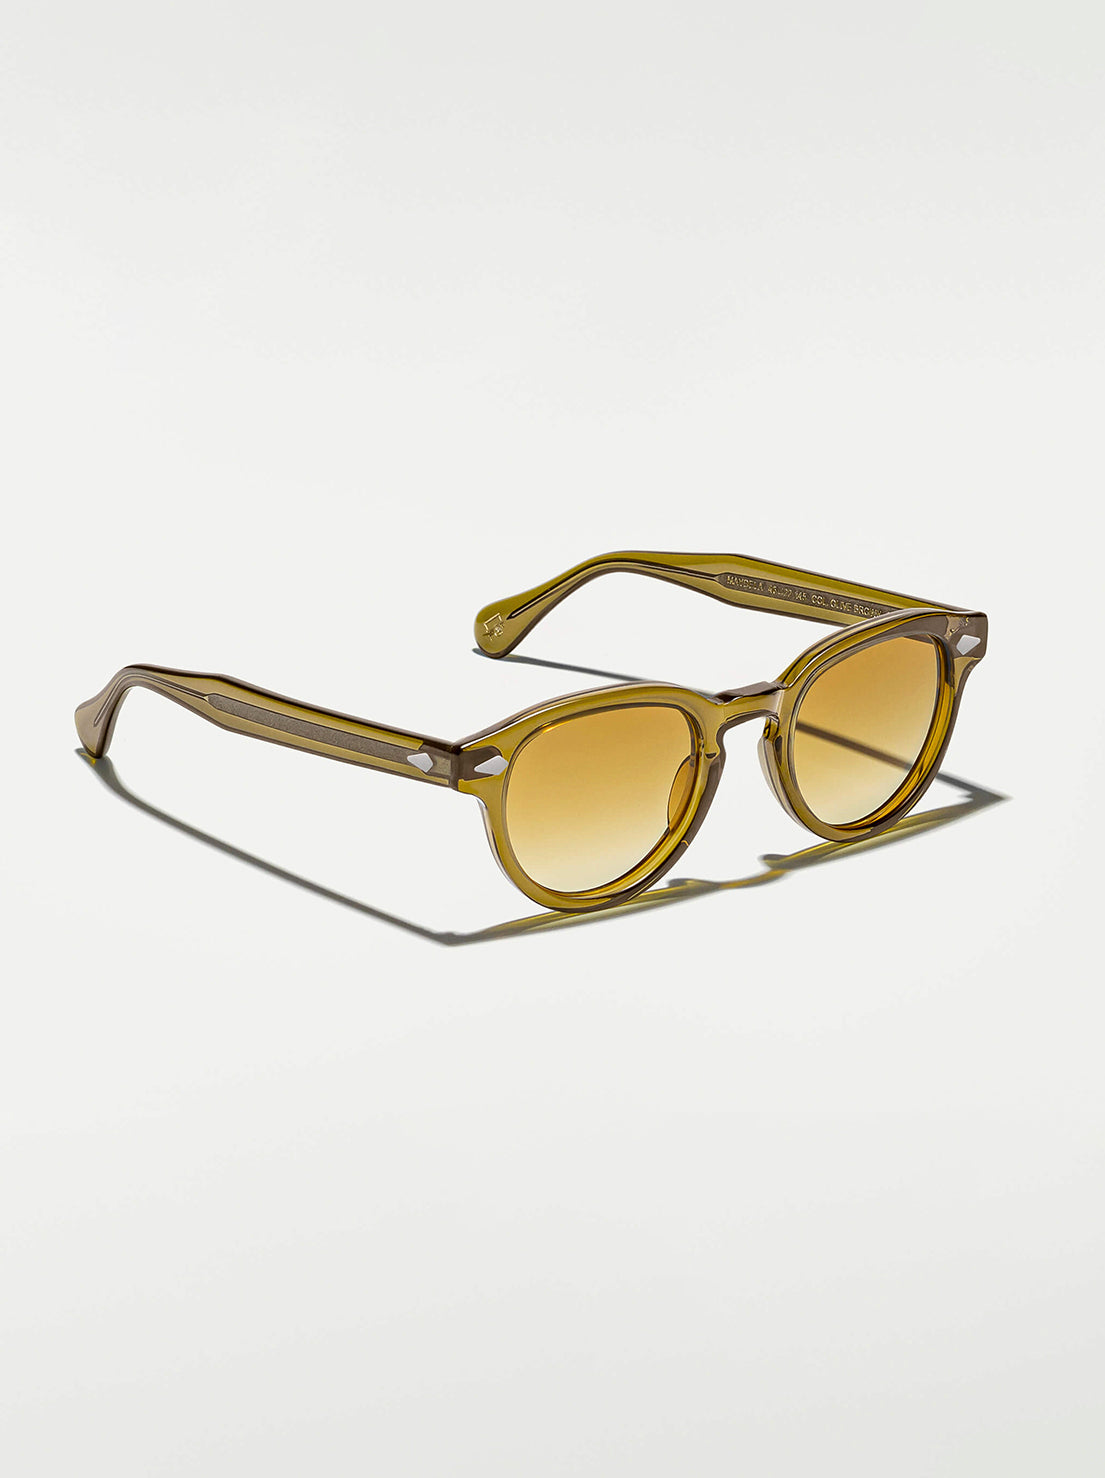 Moscot - Maydela Sunglasses in Olive Brown 49 (Wide) - Chestnut Fade Lens